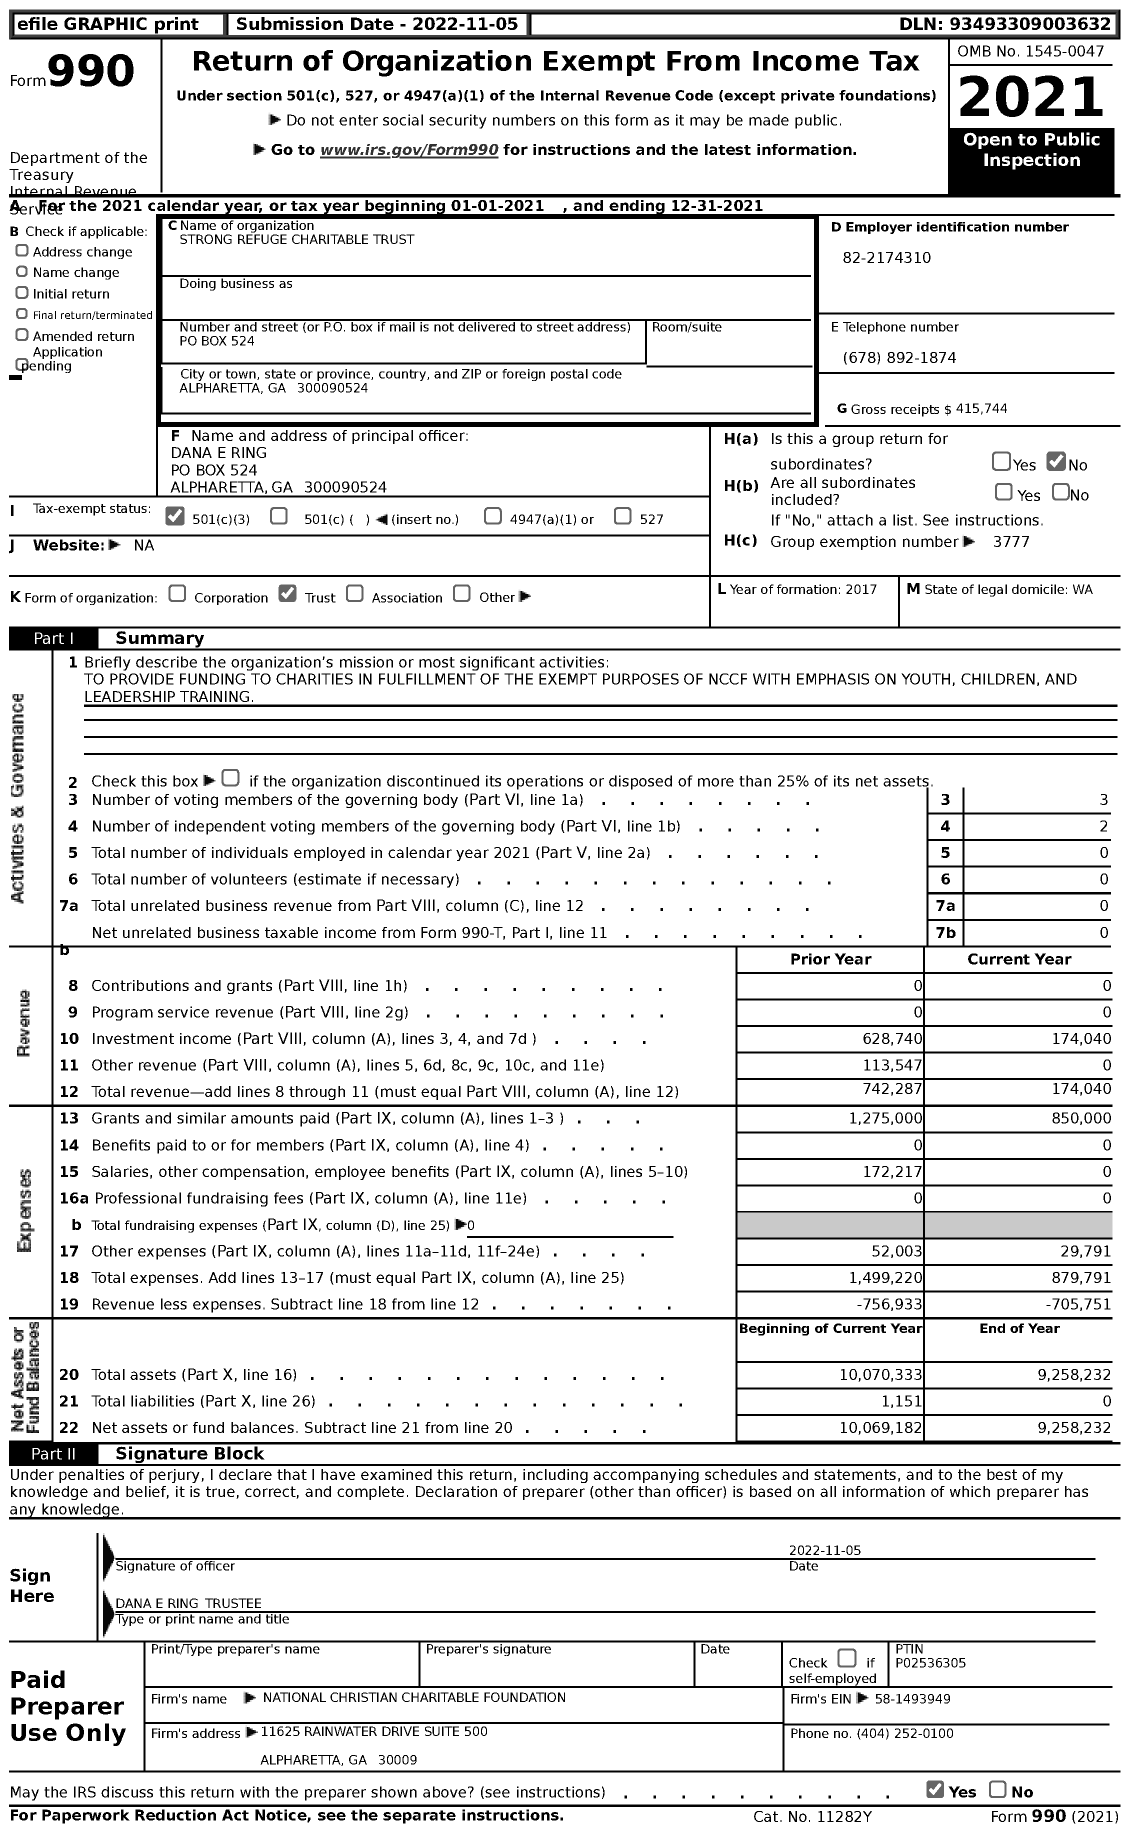 Image of first page of 2021 Form 990 for Strong Refuge Charitable Trust